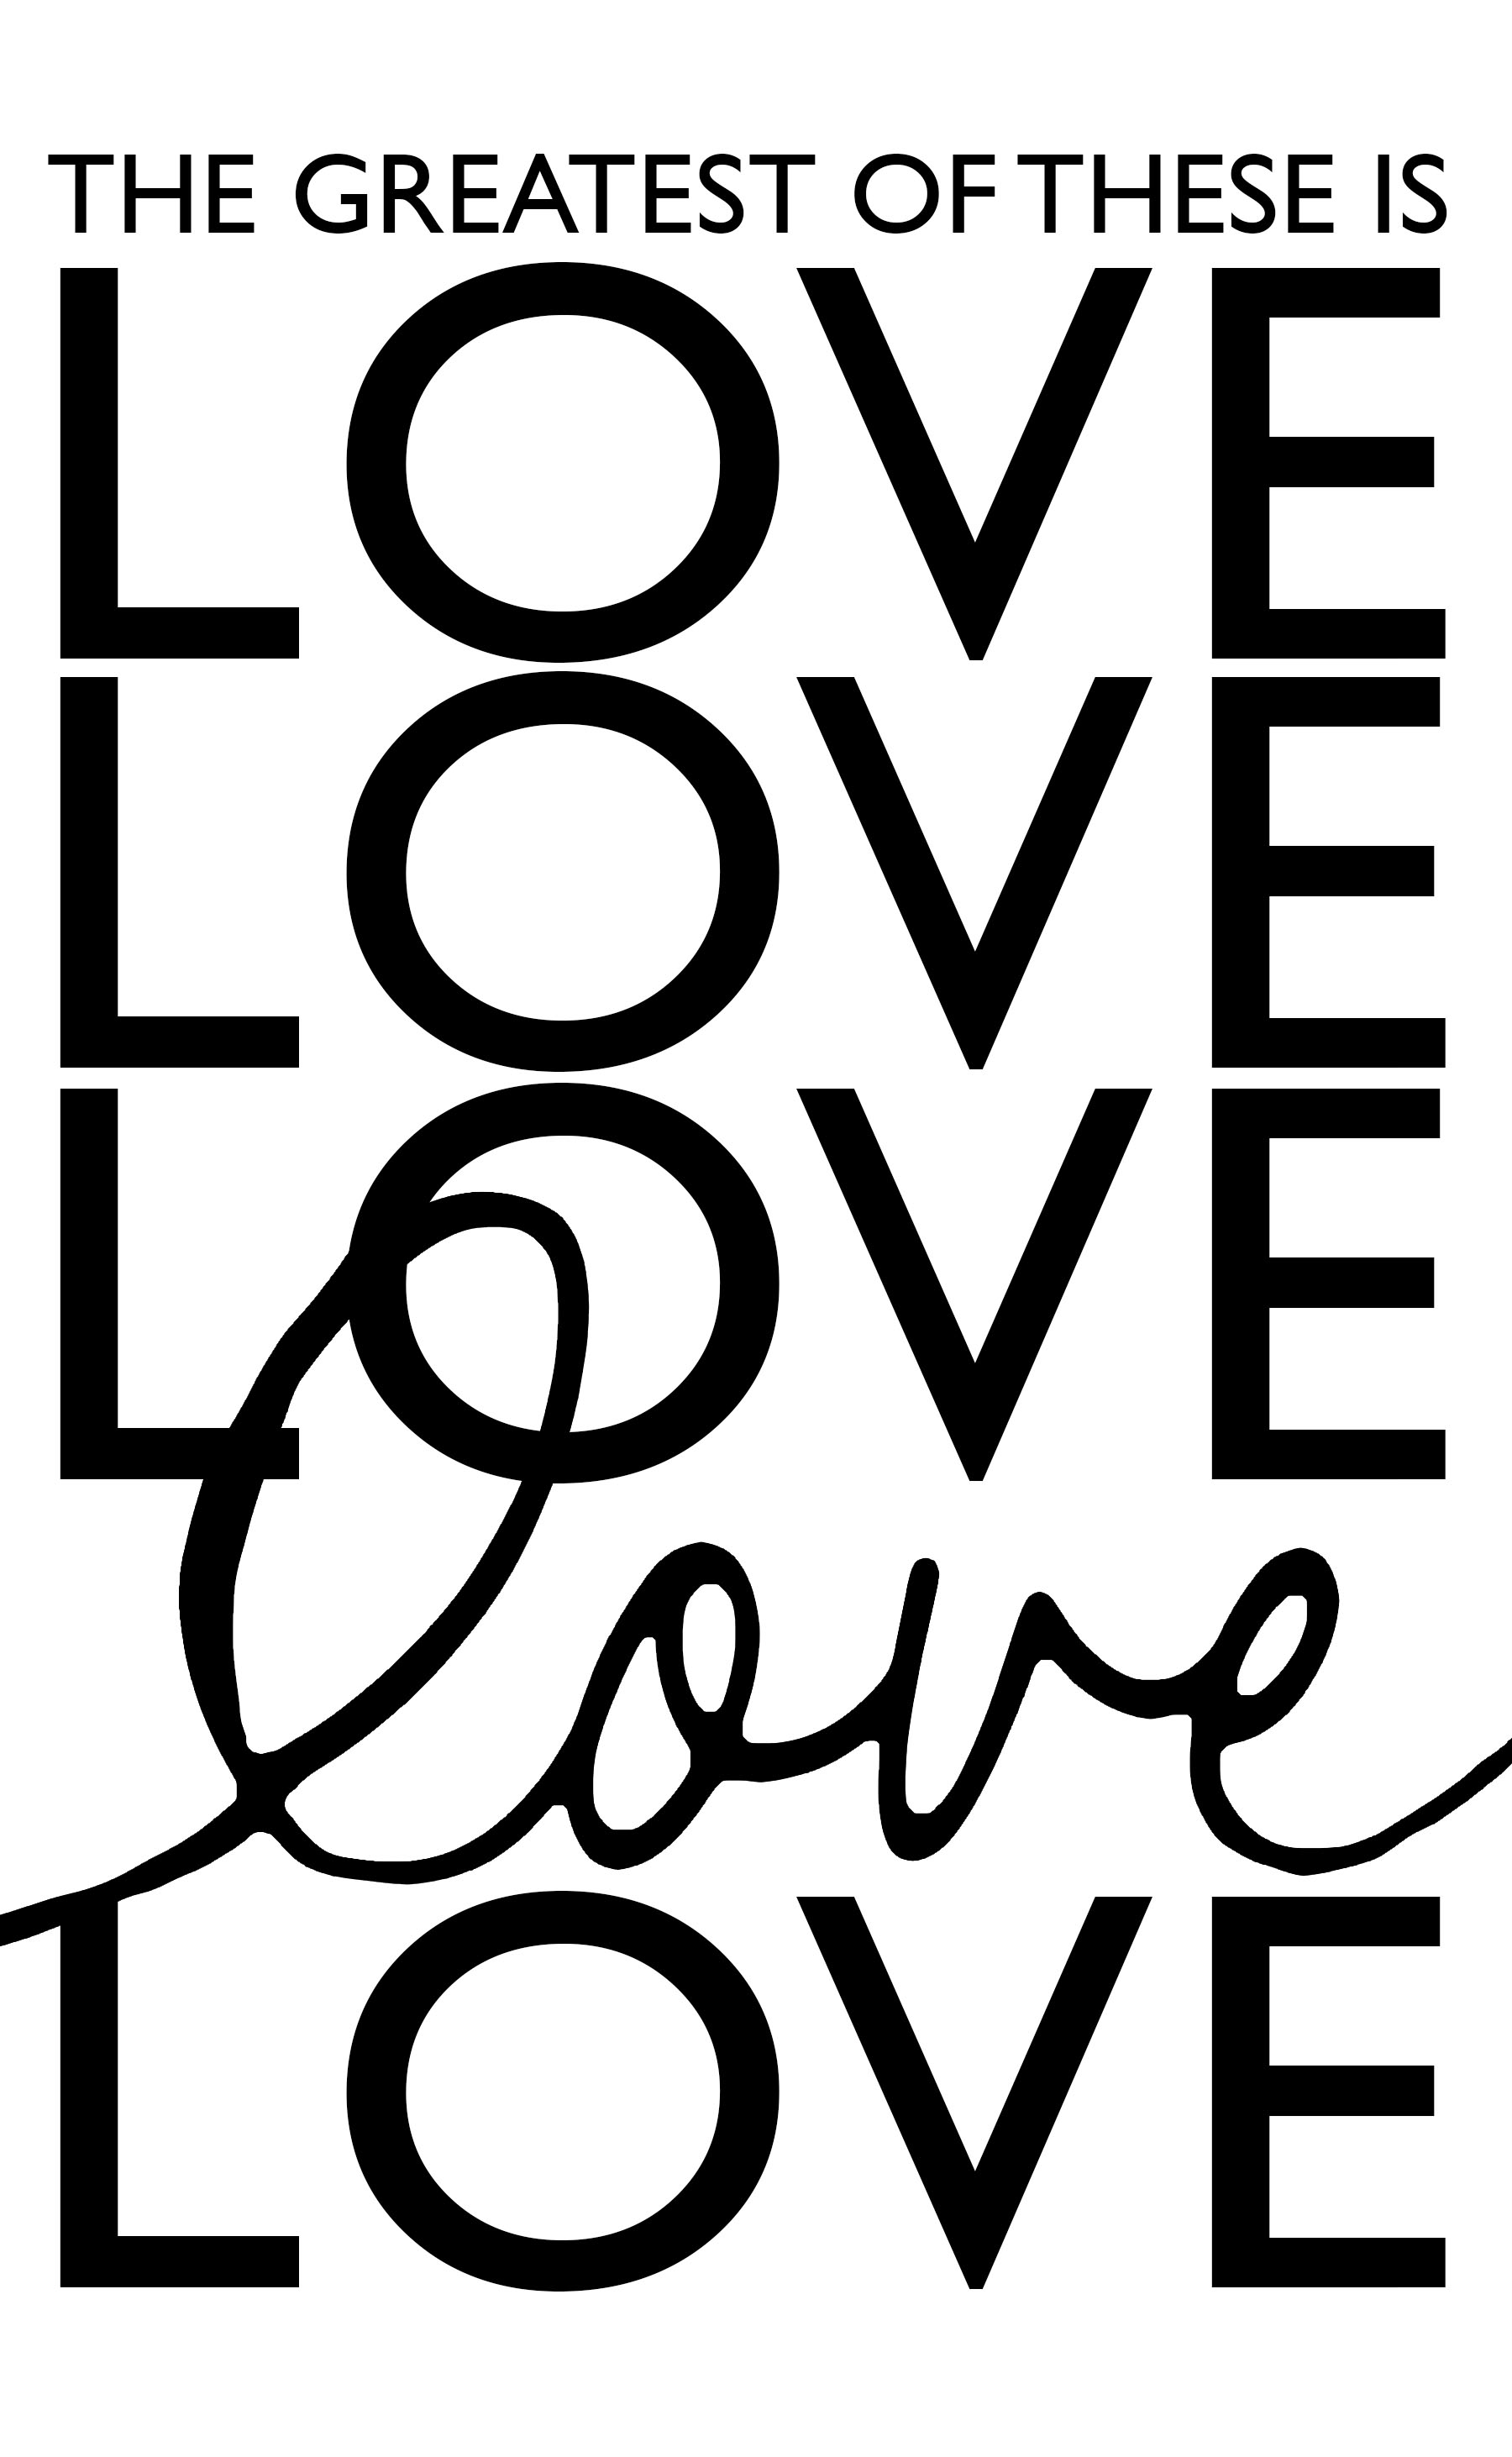 9 Best Images of Love Printable Stencil Templates Airbrush Stencils